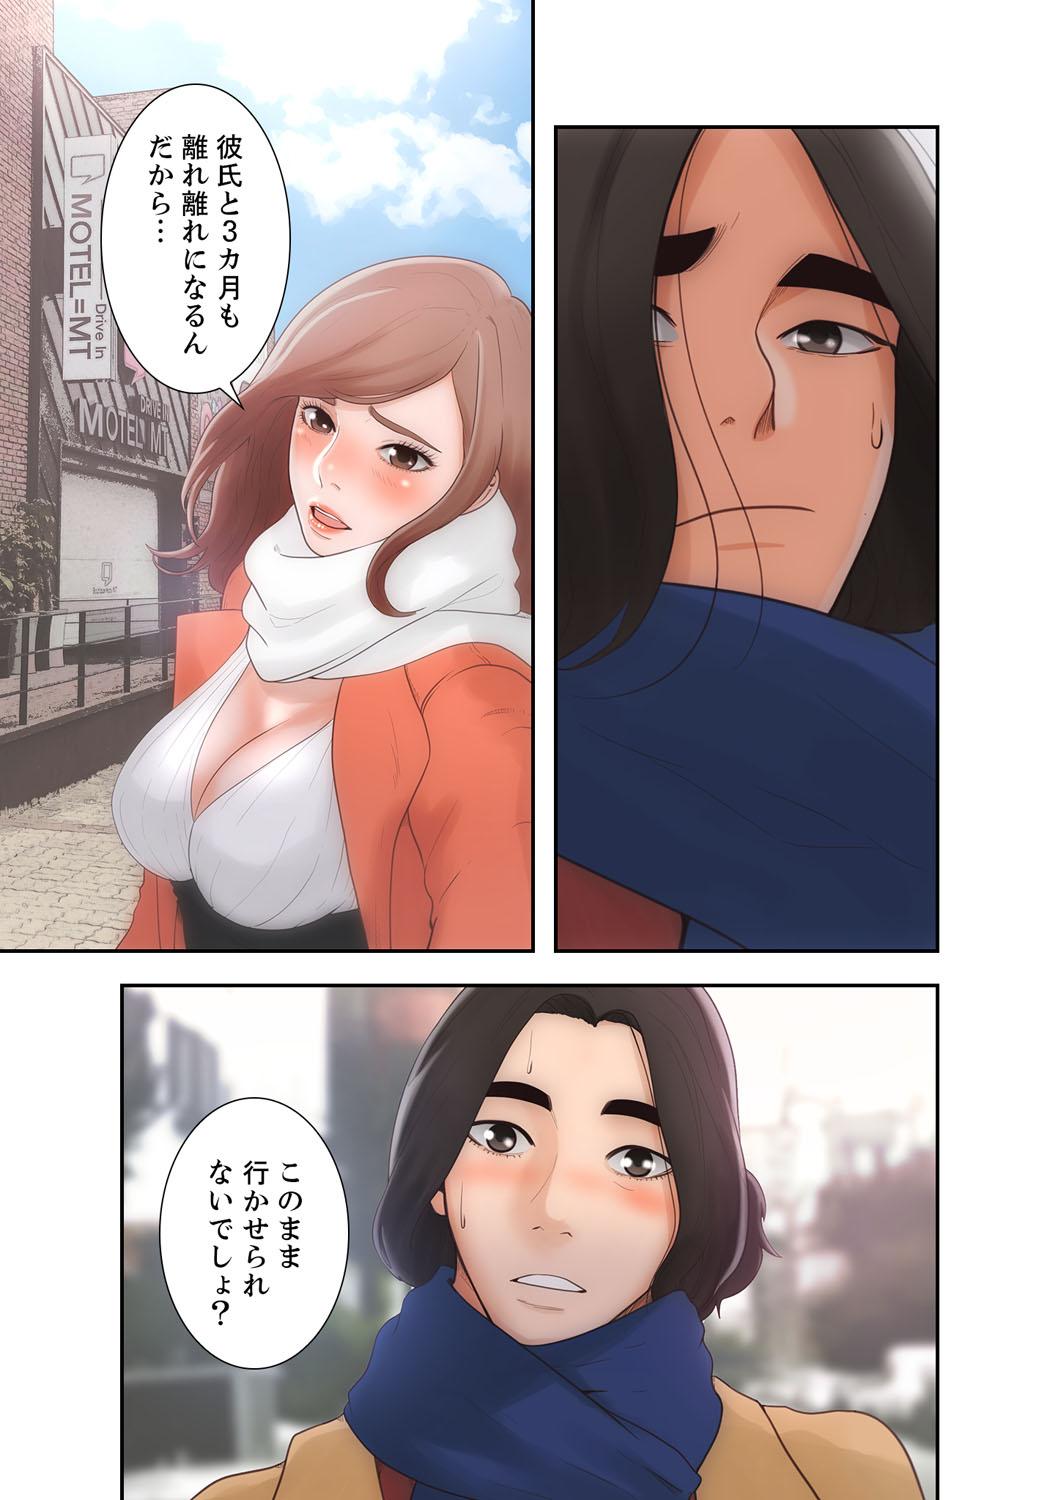 Nut 解禁 1-5 Bisexual - Page 5